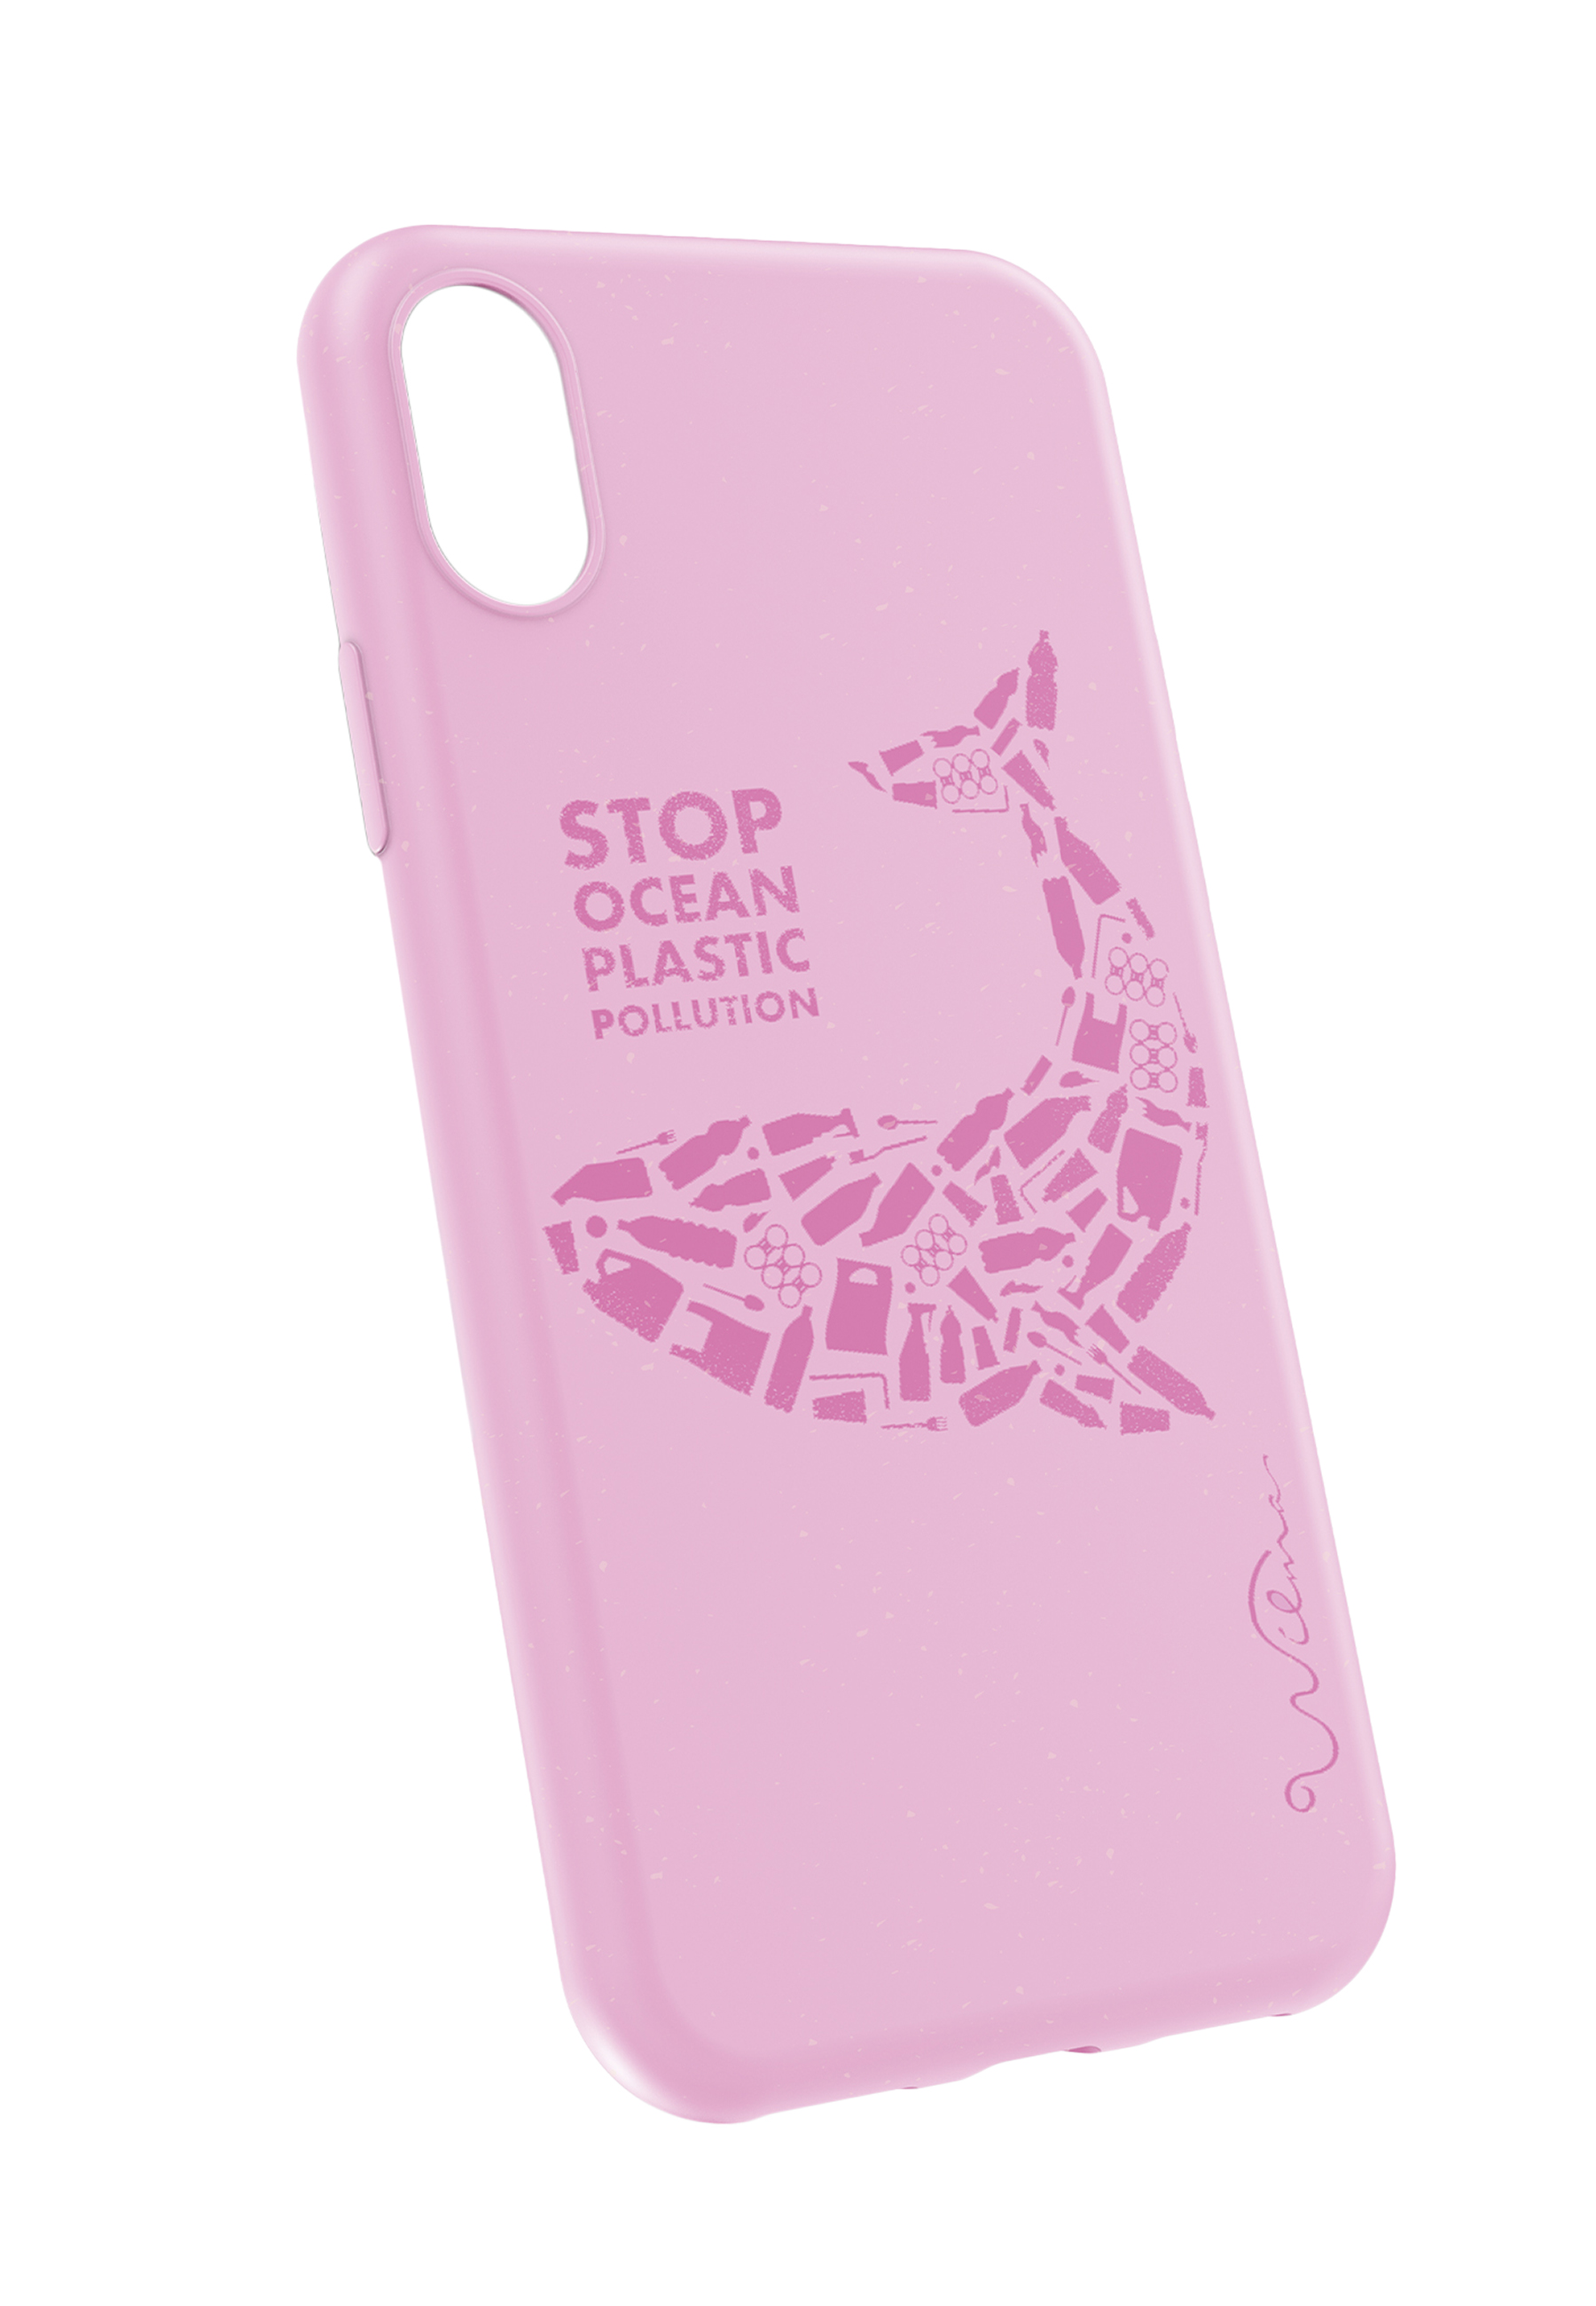 iPhone Backcover, FASHION RIPXR, pink XR, Apple, WILMA ECO BY